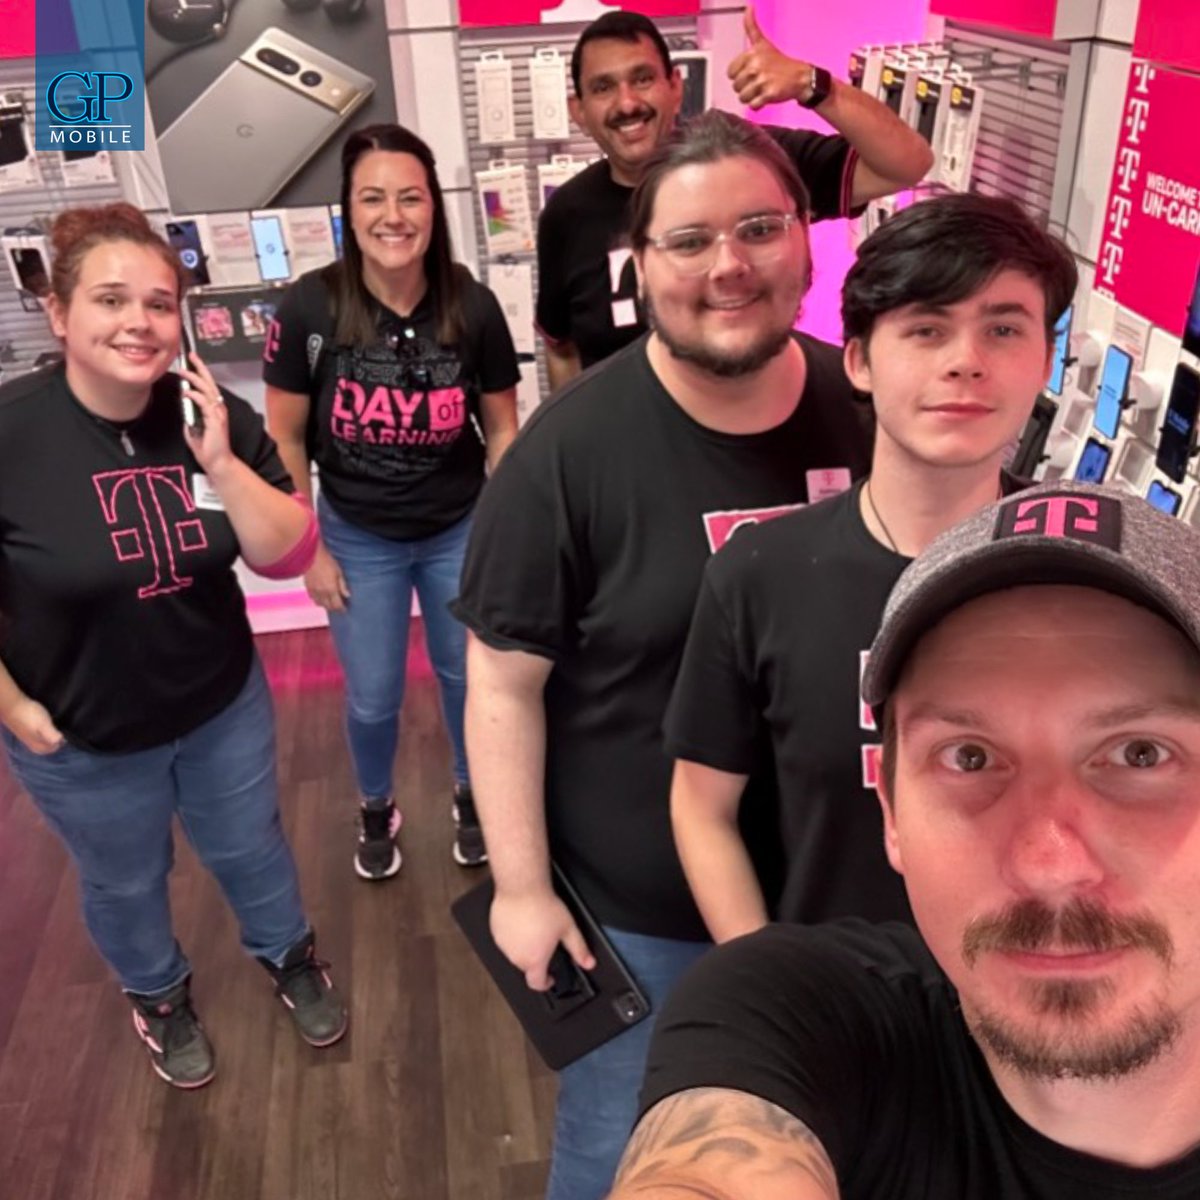 Another Audit win with our rockstar team in Ottawa, KS! With Phoenyx, Jennifer (Dir of Auditing), Abe (Auditor), Ashton, and Danny (RAM) passing their audio with style!

#takingcareofbusiness #sales #operations #leadership #tmobile